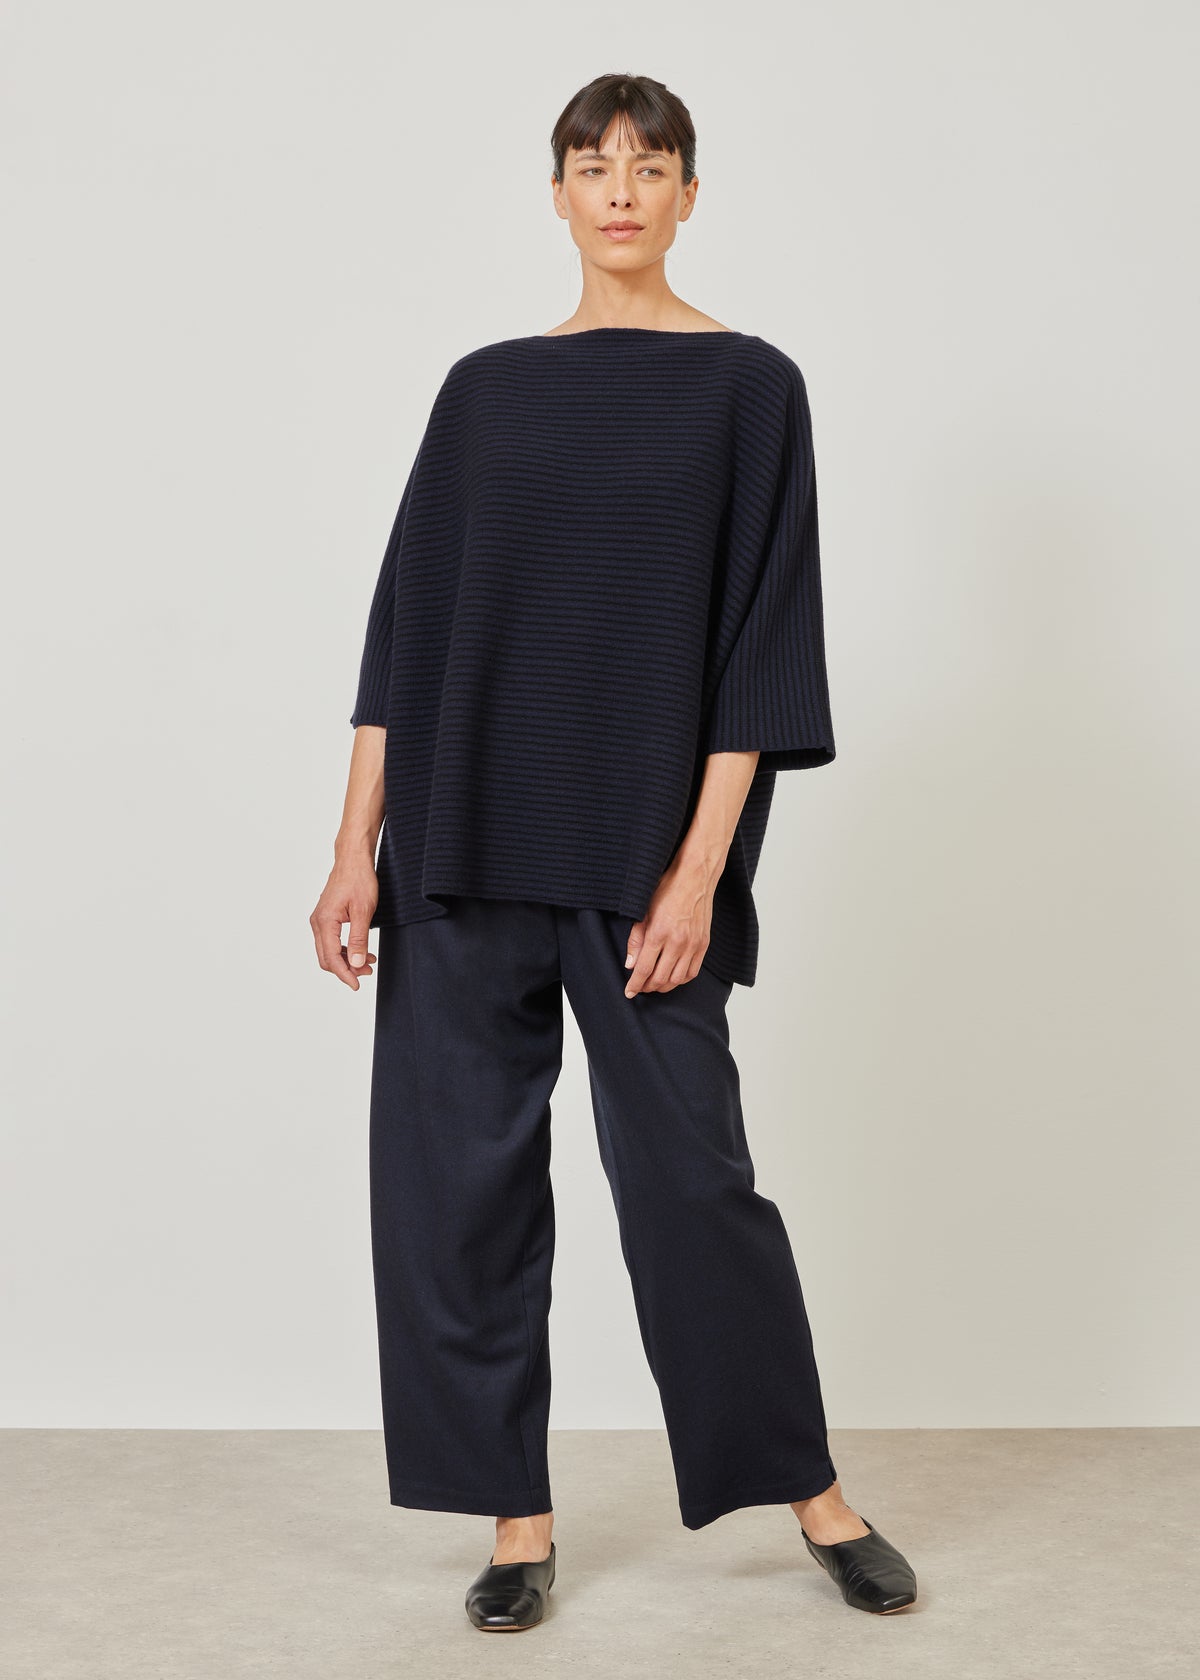 square 3/4 sleeve  top - long